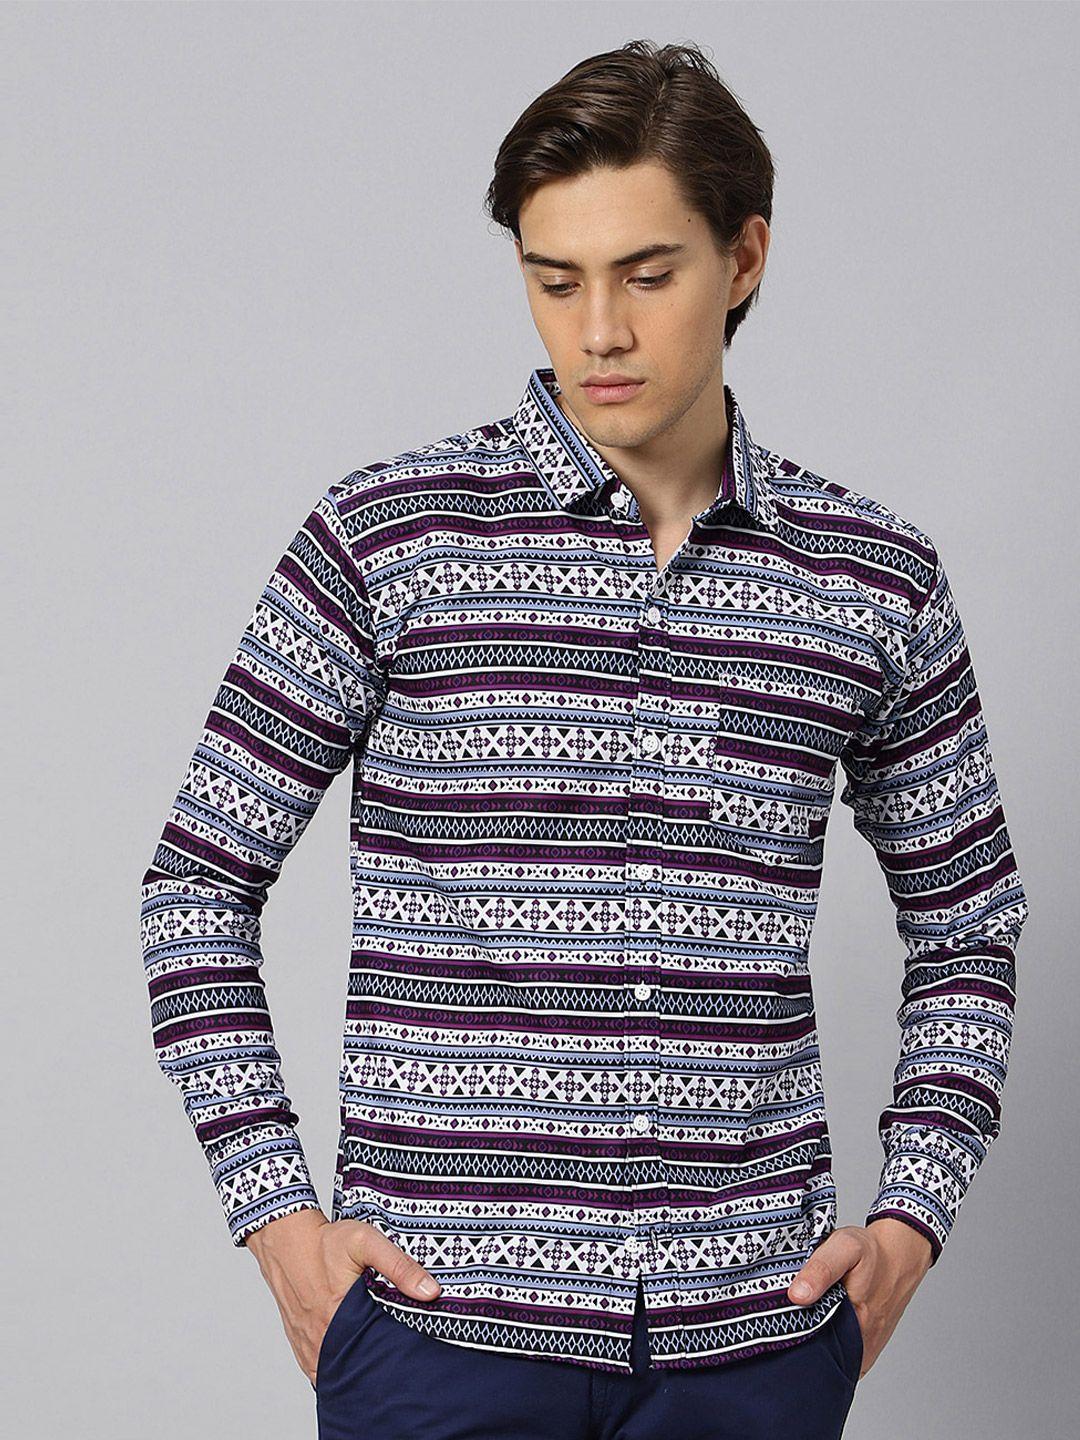 n and j men purple classic opaque printed casual shirt